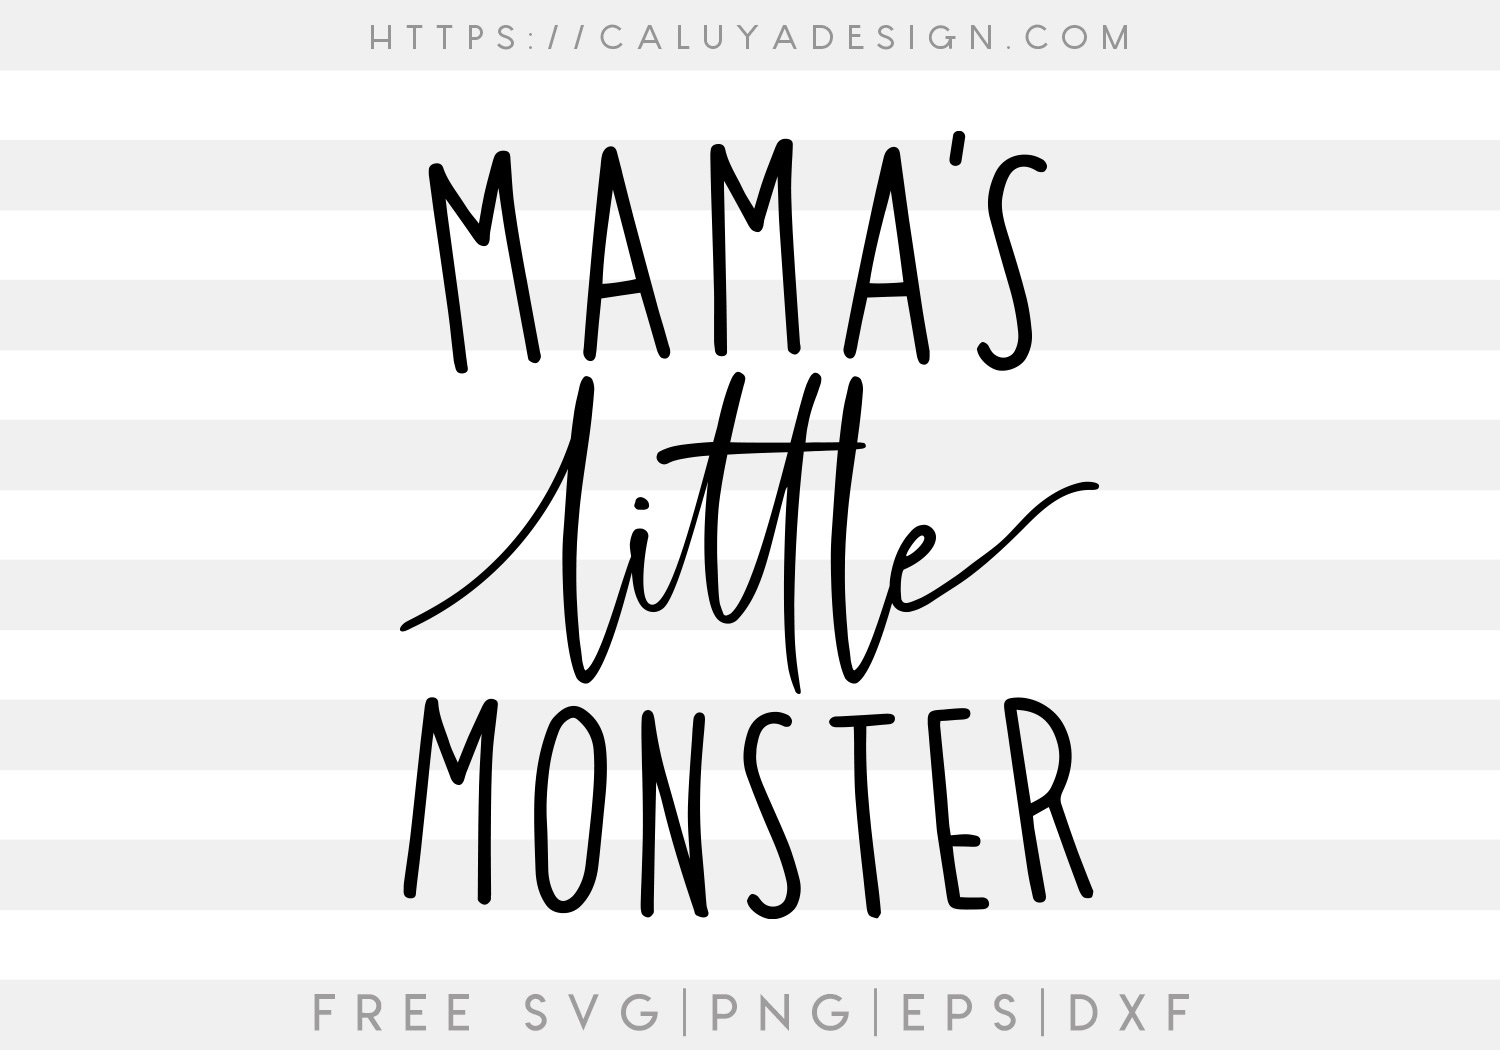 Mama’s Little Monster SVG, PNG, EPS & DXF